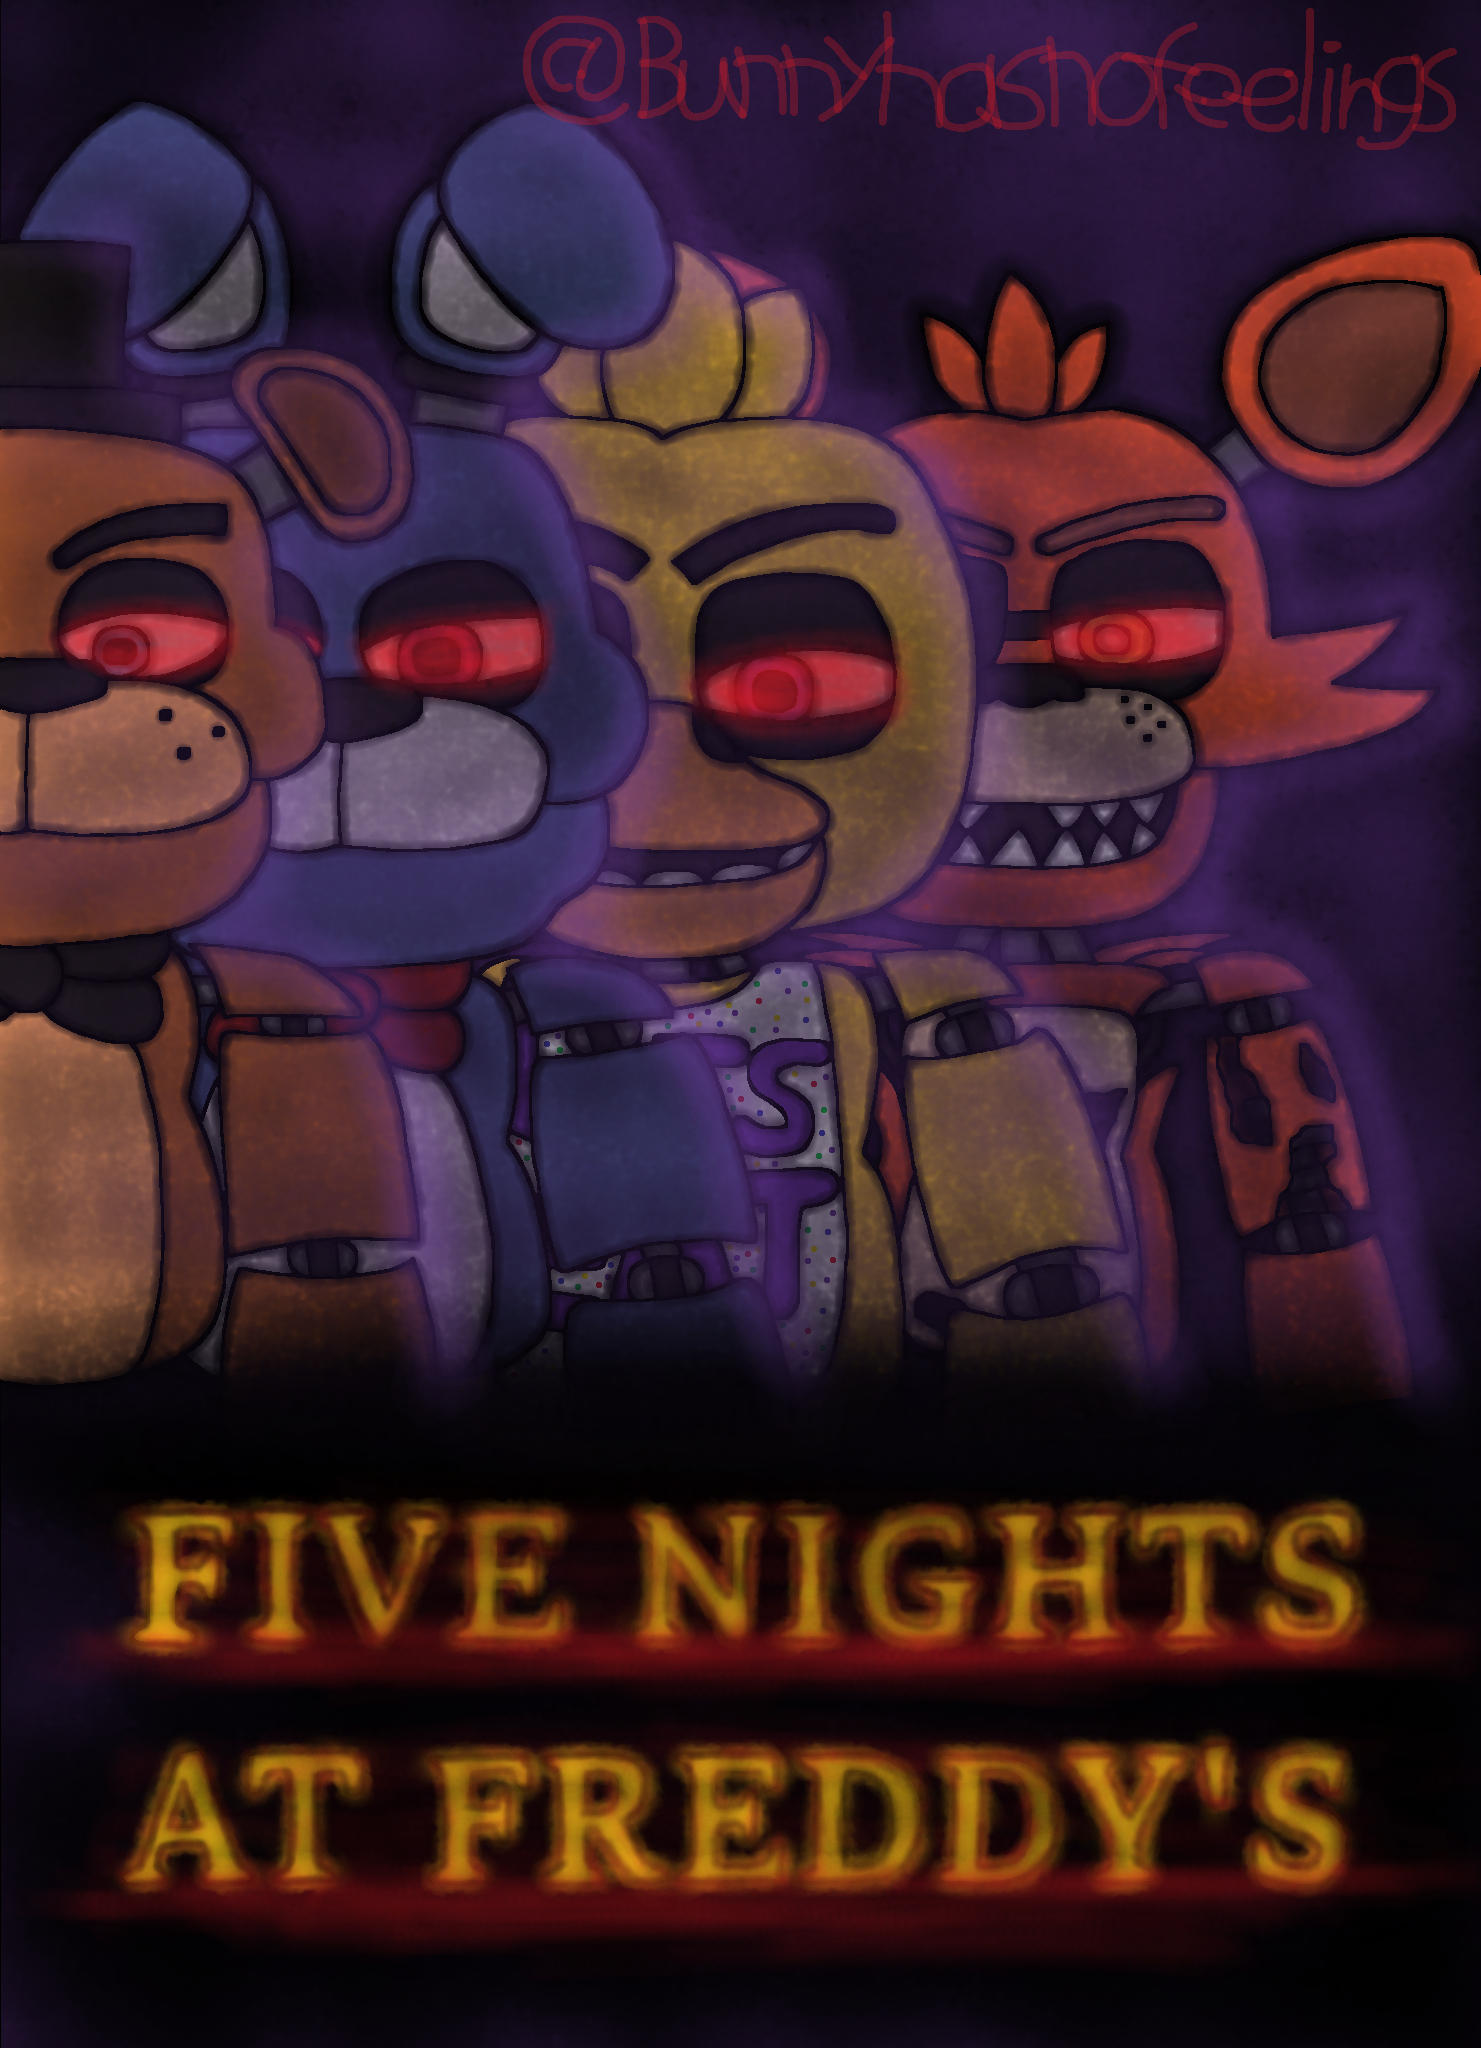 Five nights at Freddys 2 by GareBearArt1 on DeviantArt